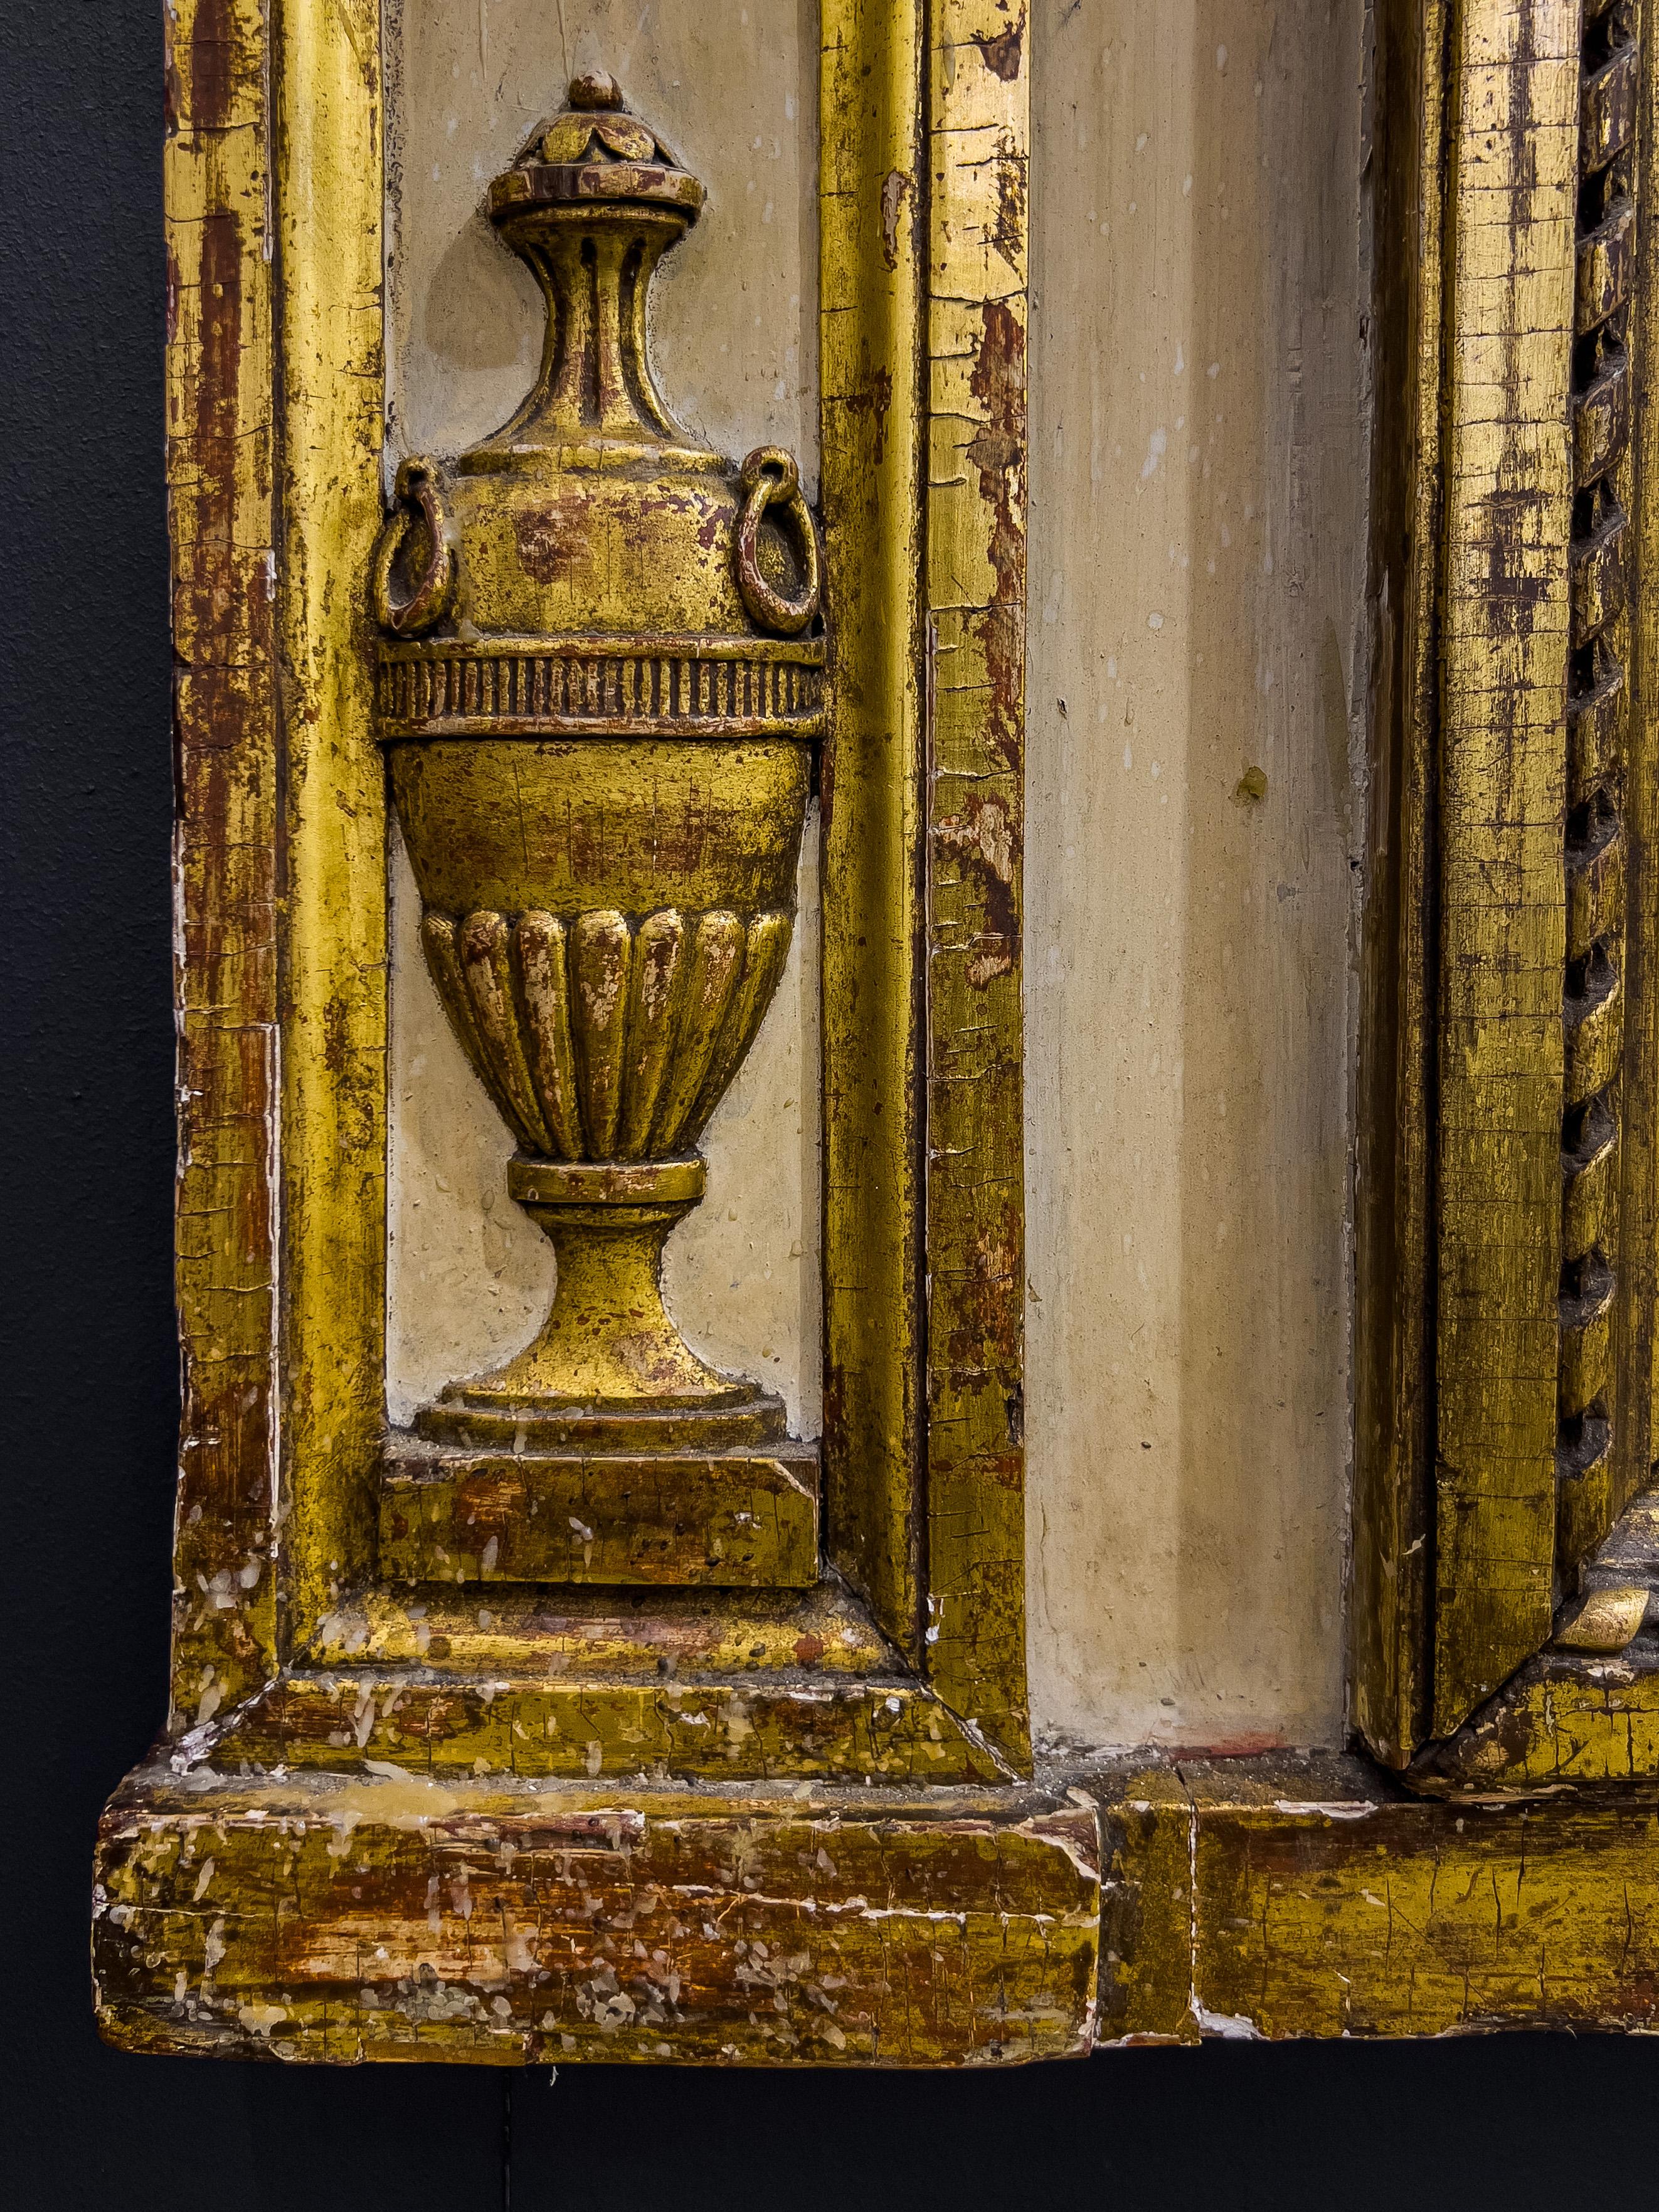 19th C. Neoclassical carved, painted and Parcel gilt mantle mirror. The mirror is in two pieces and the carving depicts rosette swagged garland and urns.